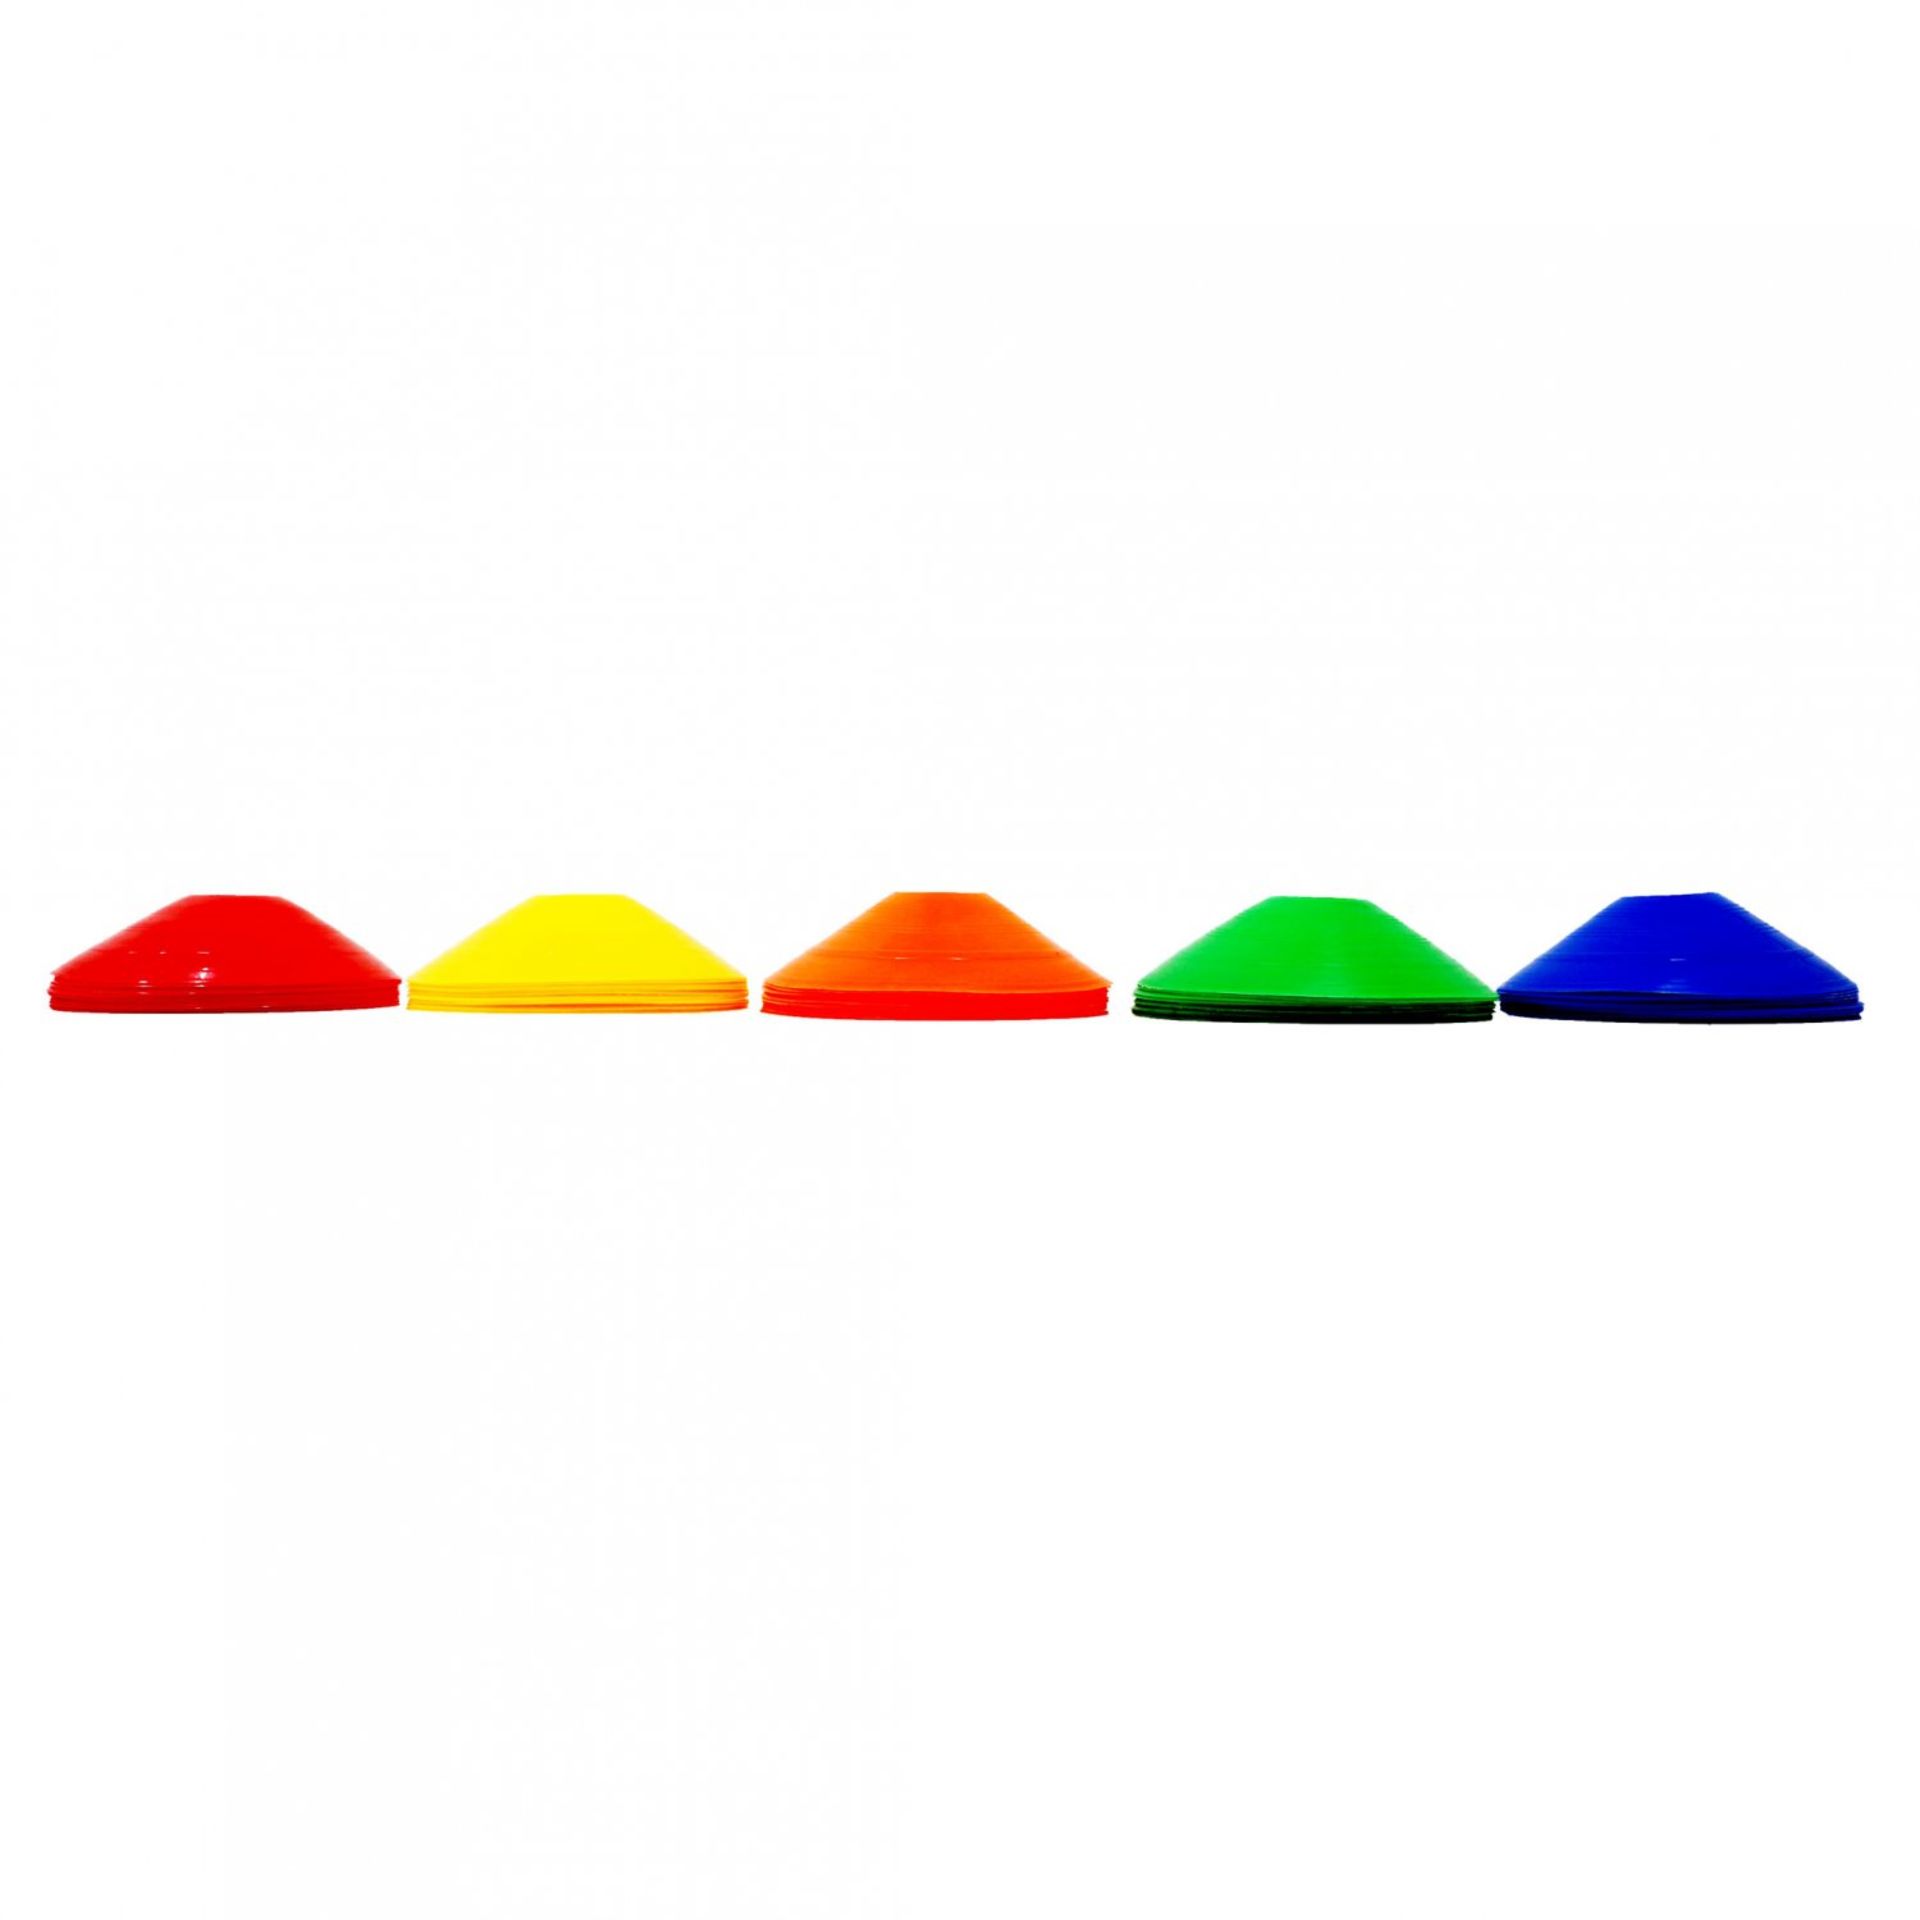 (SK89) 50x Multi Coloured Sports Training Markers Discs Cones w/ Stand This set of 50 traini... - Image 2 of 2